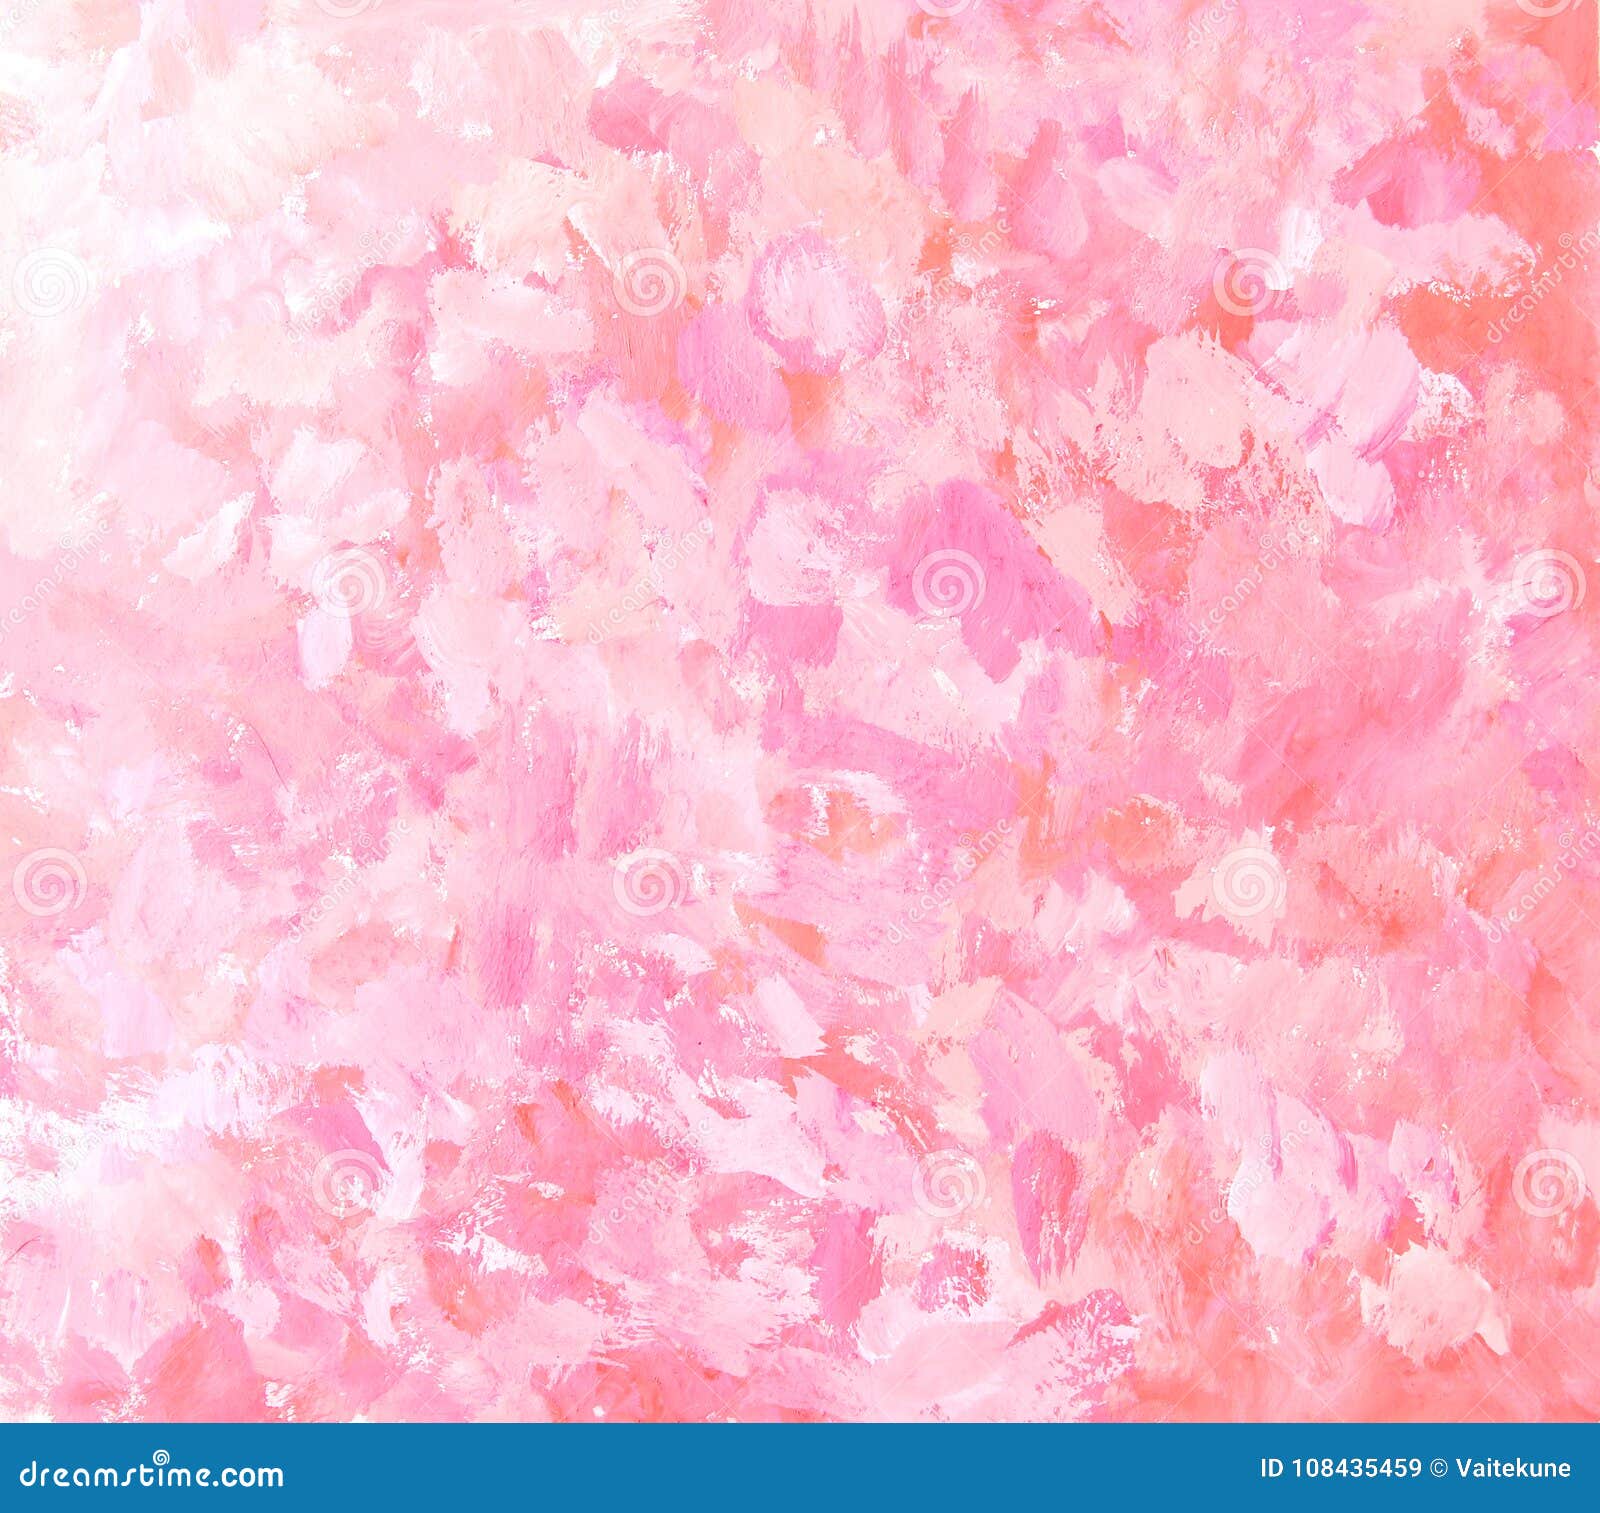 Abstract Pink Brushstroke Painting Background. Stock Illustration ...